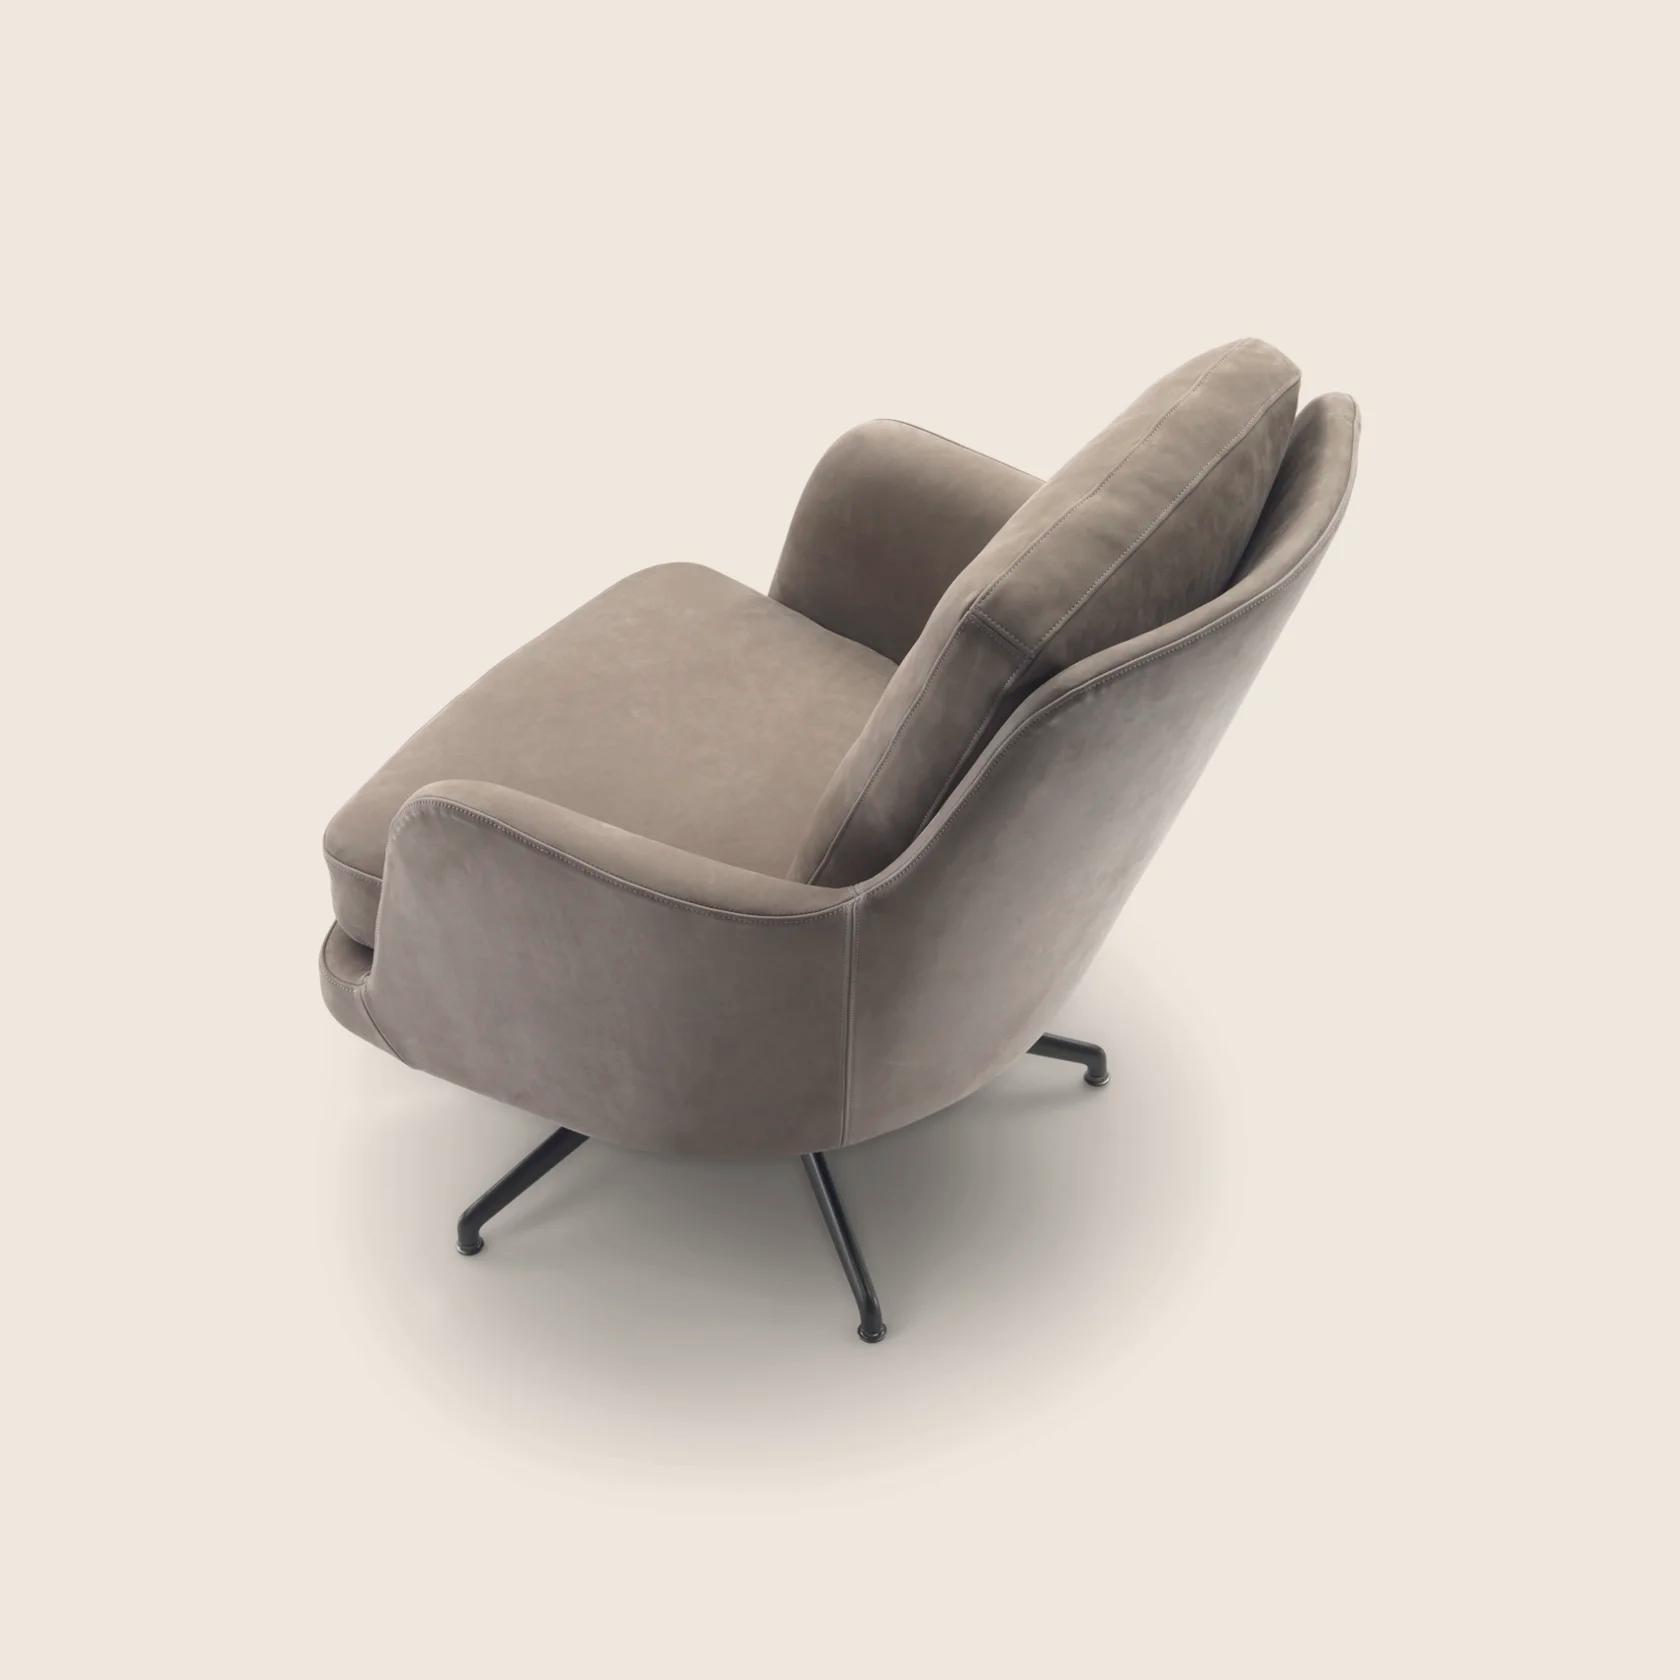 028623_MARLEY_ARMCHAIR_03.png